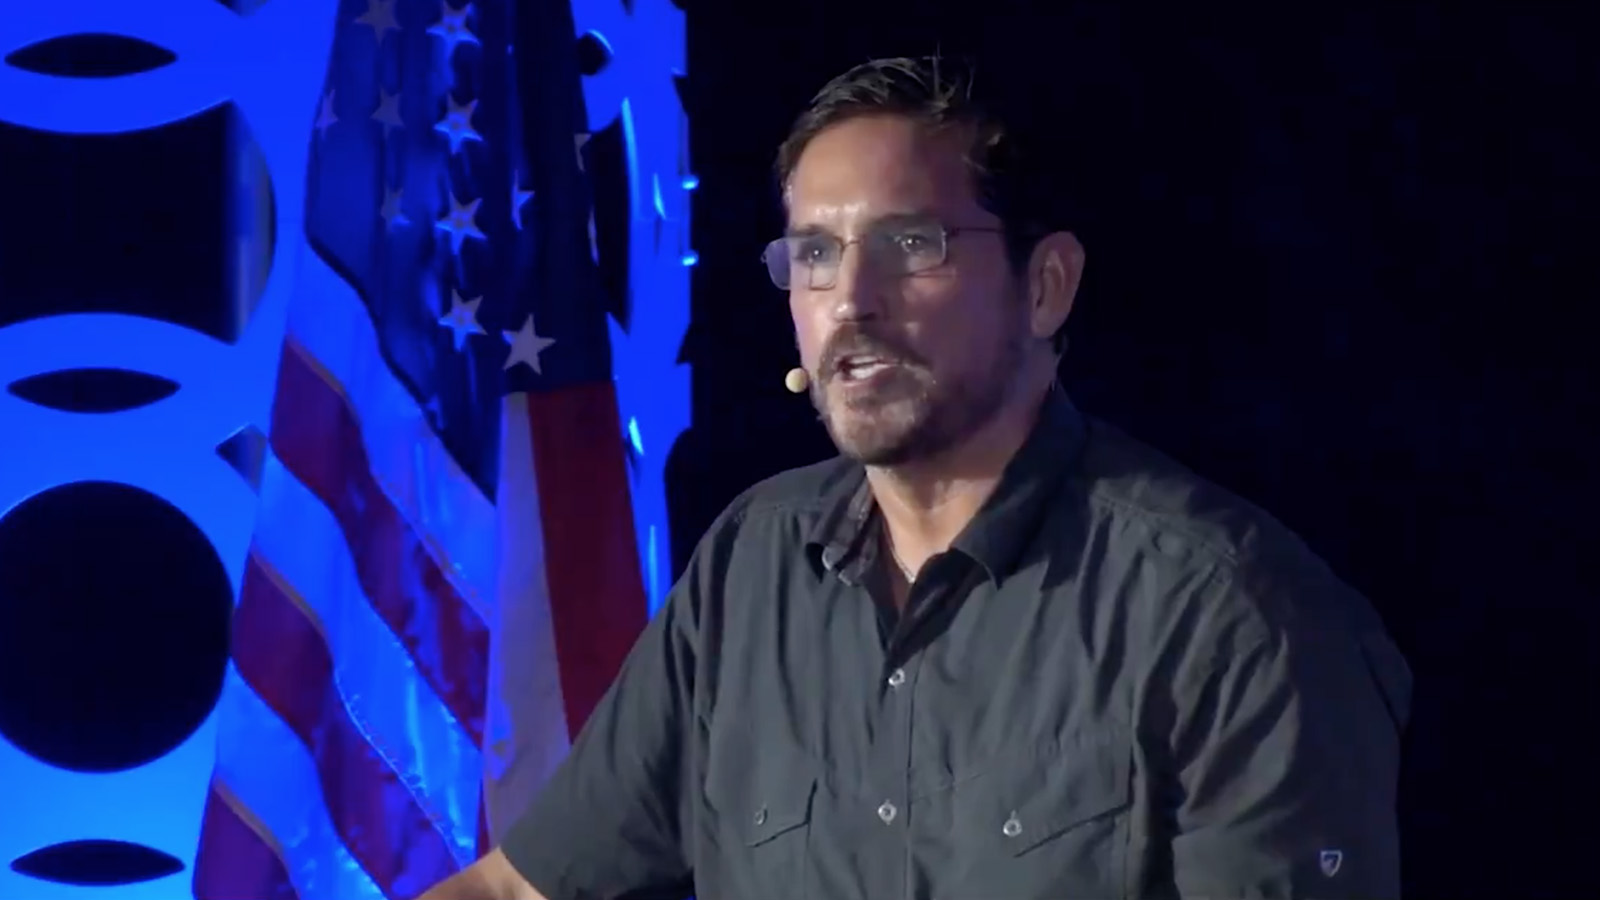 Jim Caviezel speaks at the “For God & Country: Patriot Double Down” conference in Las Vegas. Video screen grab